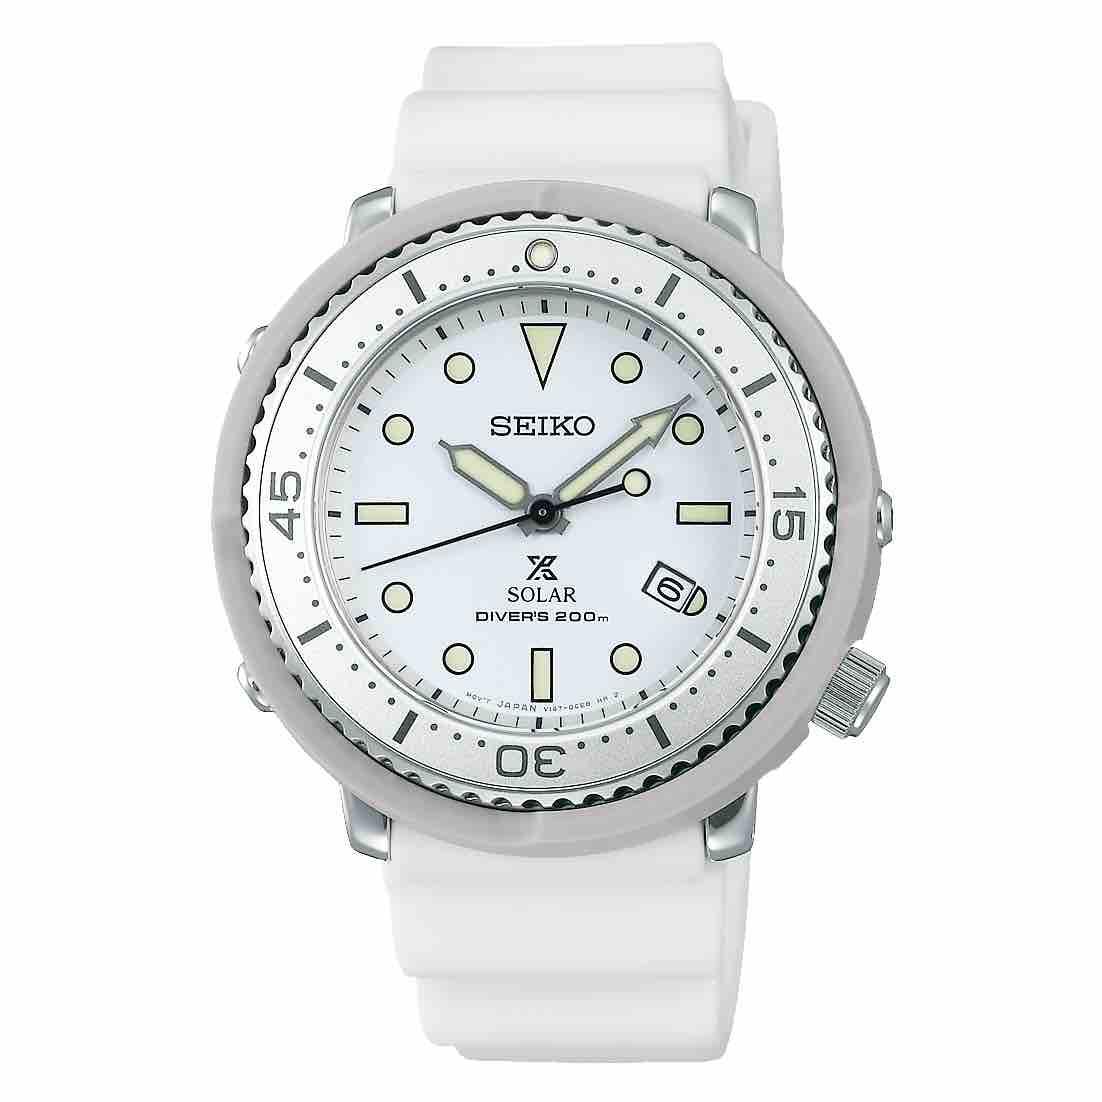 BNIB SEIKO PROSPEX LOWERCASE PRODUCED MODEL MADE IN JAPAN WHITE DIAL RUBBER  STRAP MAN WATCH STBR021 | Lazada Singapore